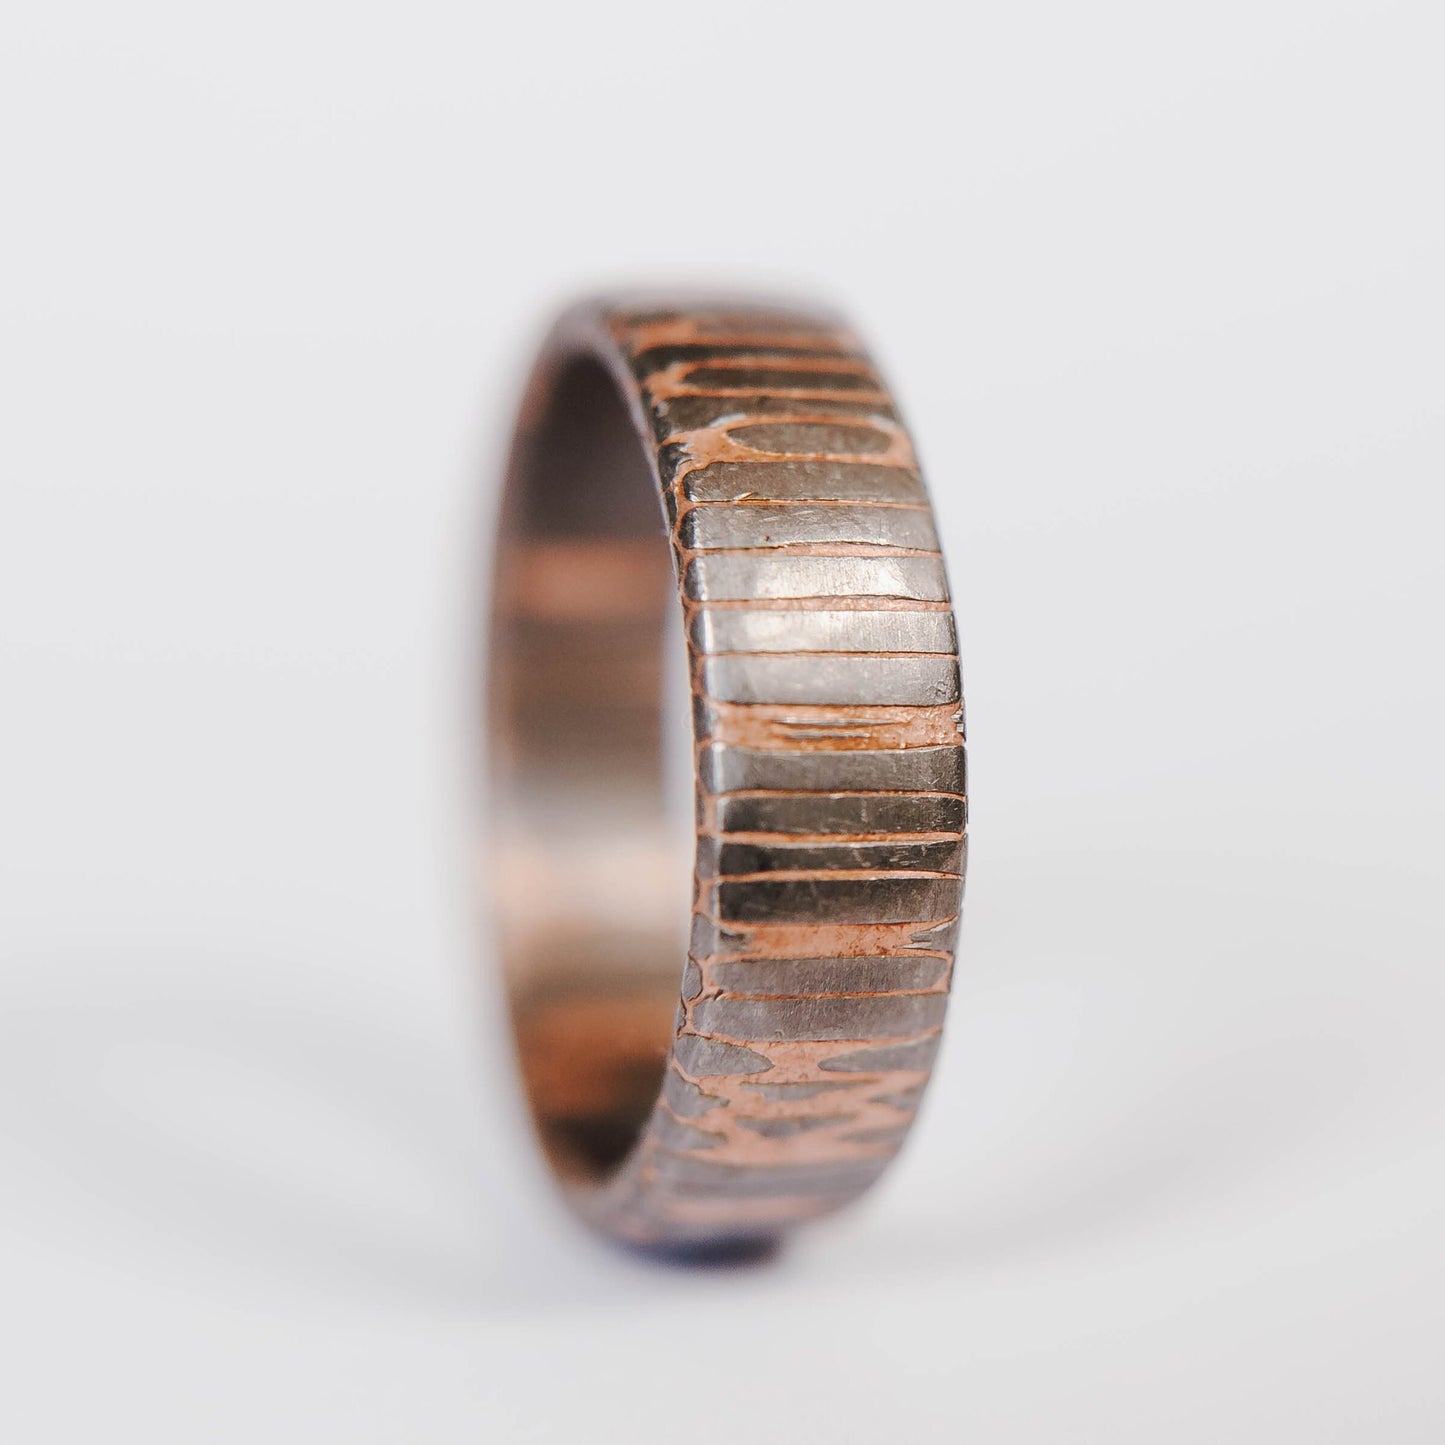 Superconductor wedding band. This photo shows an etched titanium-niobium and copper striped ring. (Vertical with white background)